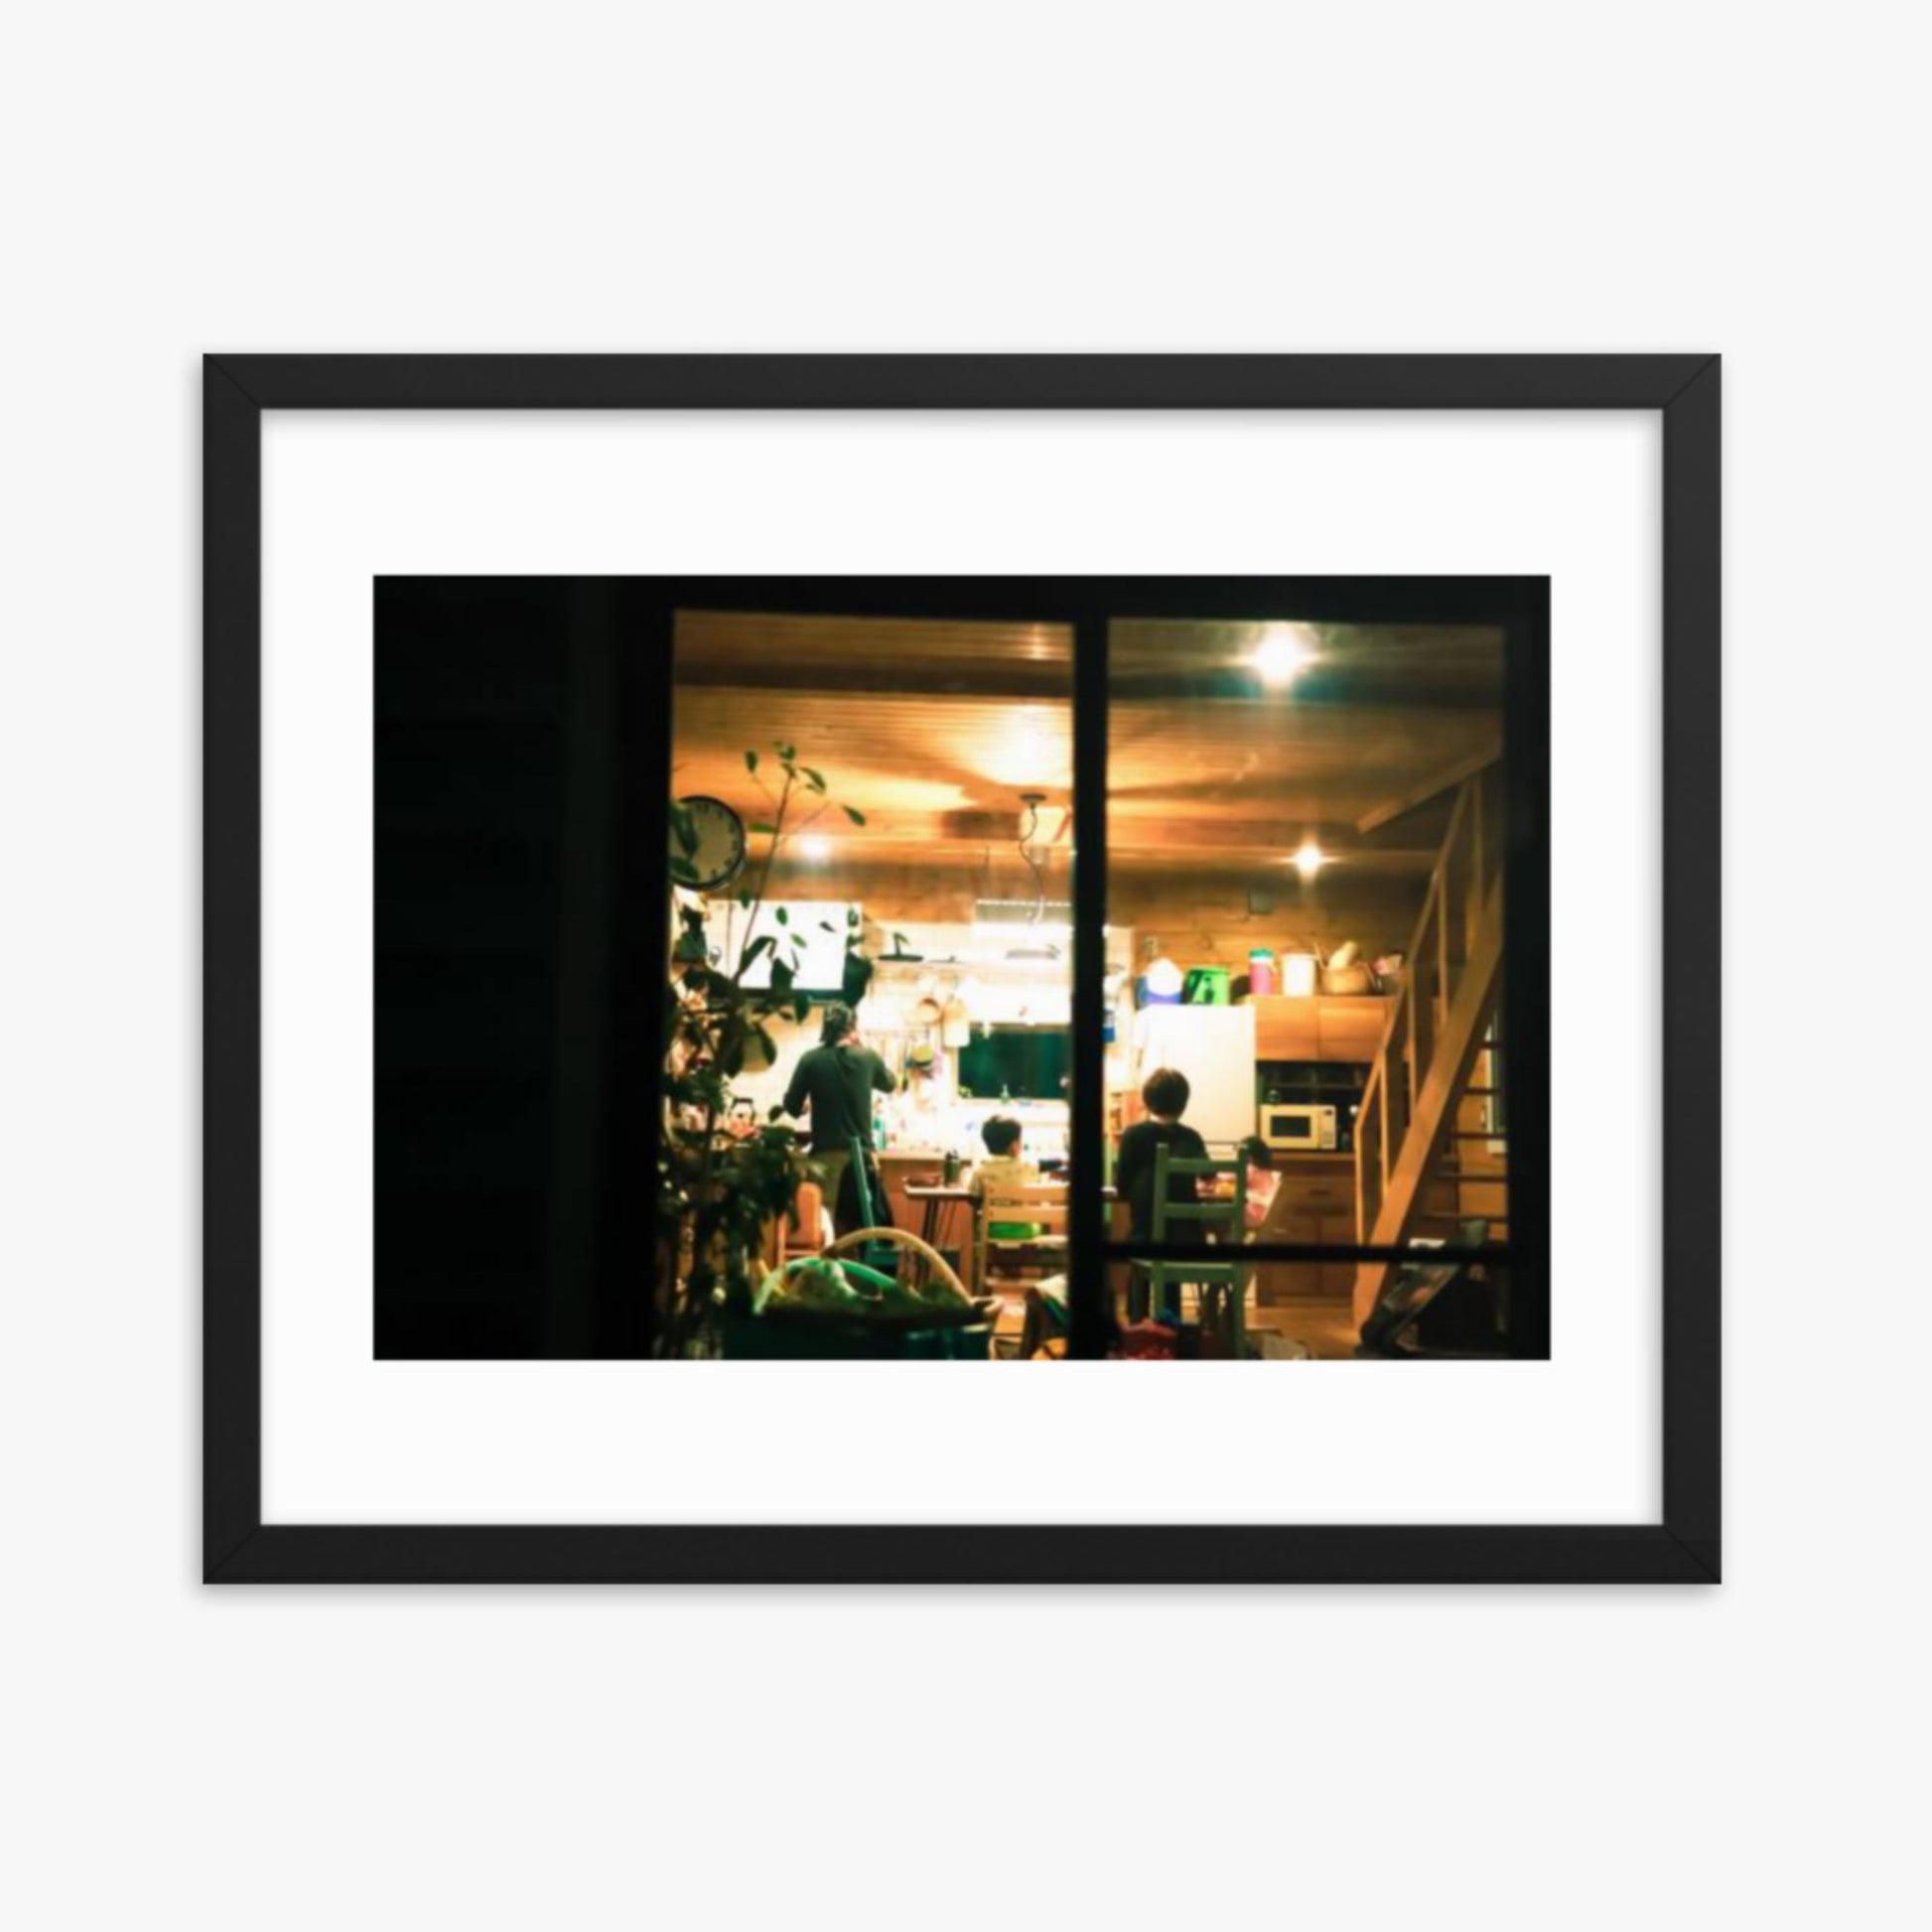 Log cabin seen through the window 16x20 in Poster With Black Frame